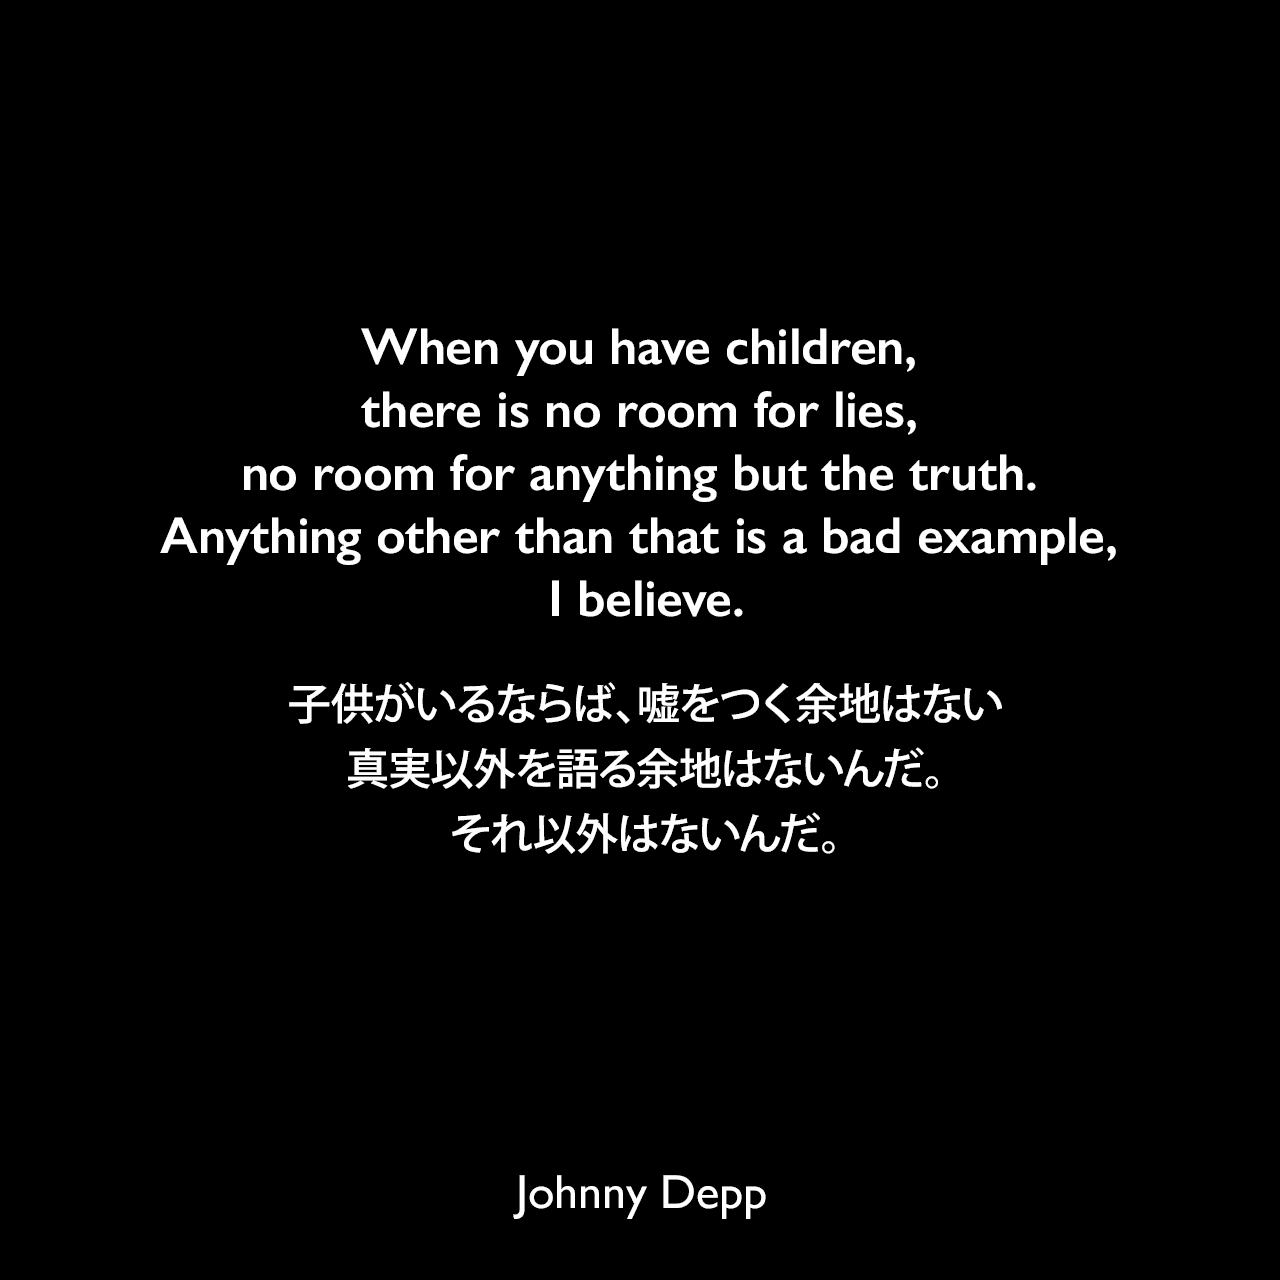 When you have children, there is no room for lies, no room for anything but the truth. Anything other than that is a bad example, I believe.子供がいるならば、嘘をつく余地はない、真実以外を語る余地はないんだ。それ以外はないんだ。Johnny Depp